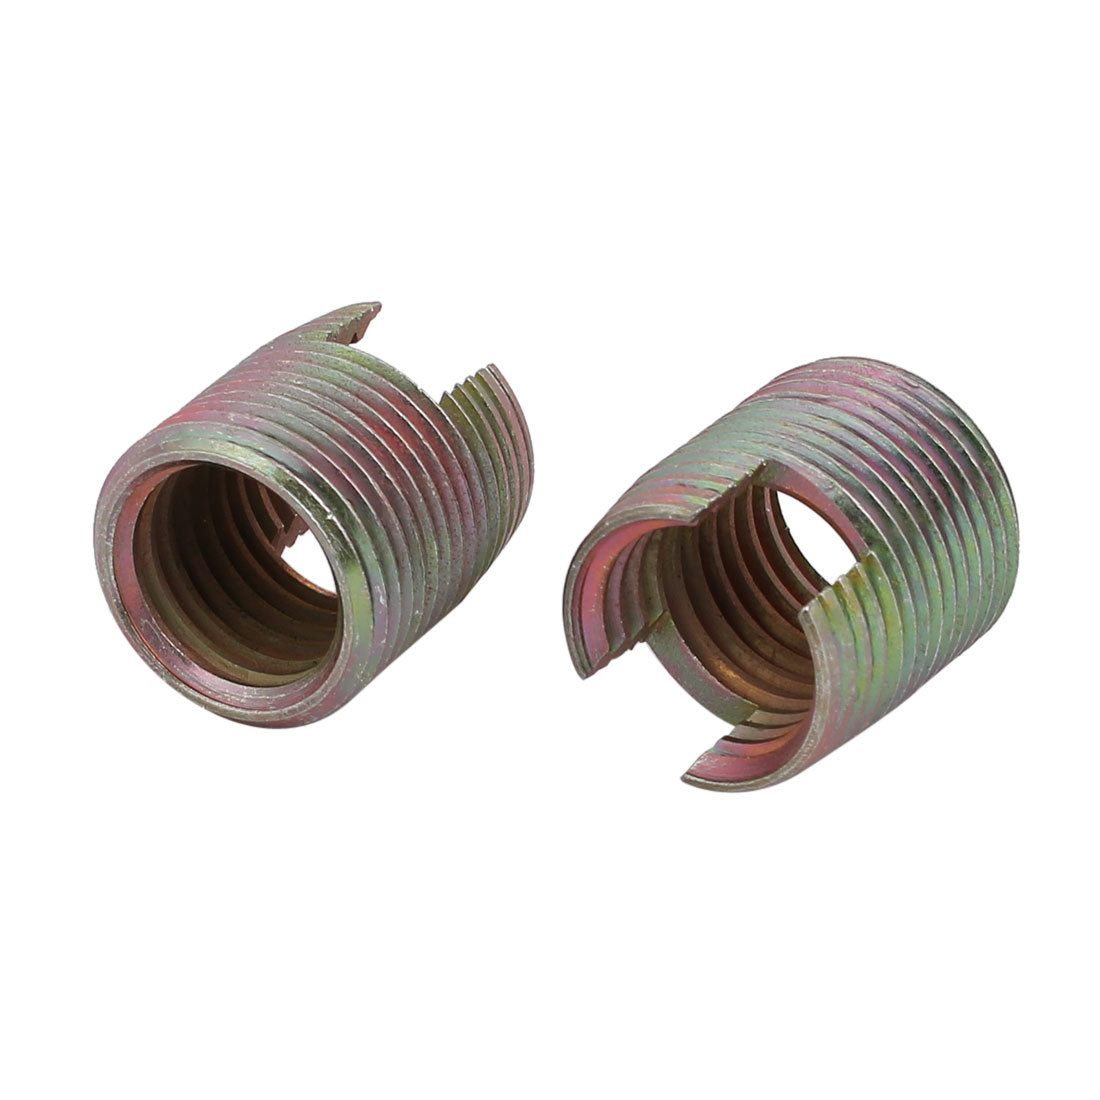 uxcell Uxcell M16x22mm Carbon Steel Zinc Plated Self Tapping Slotted Thread Insert 2pcs